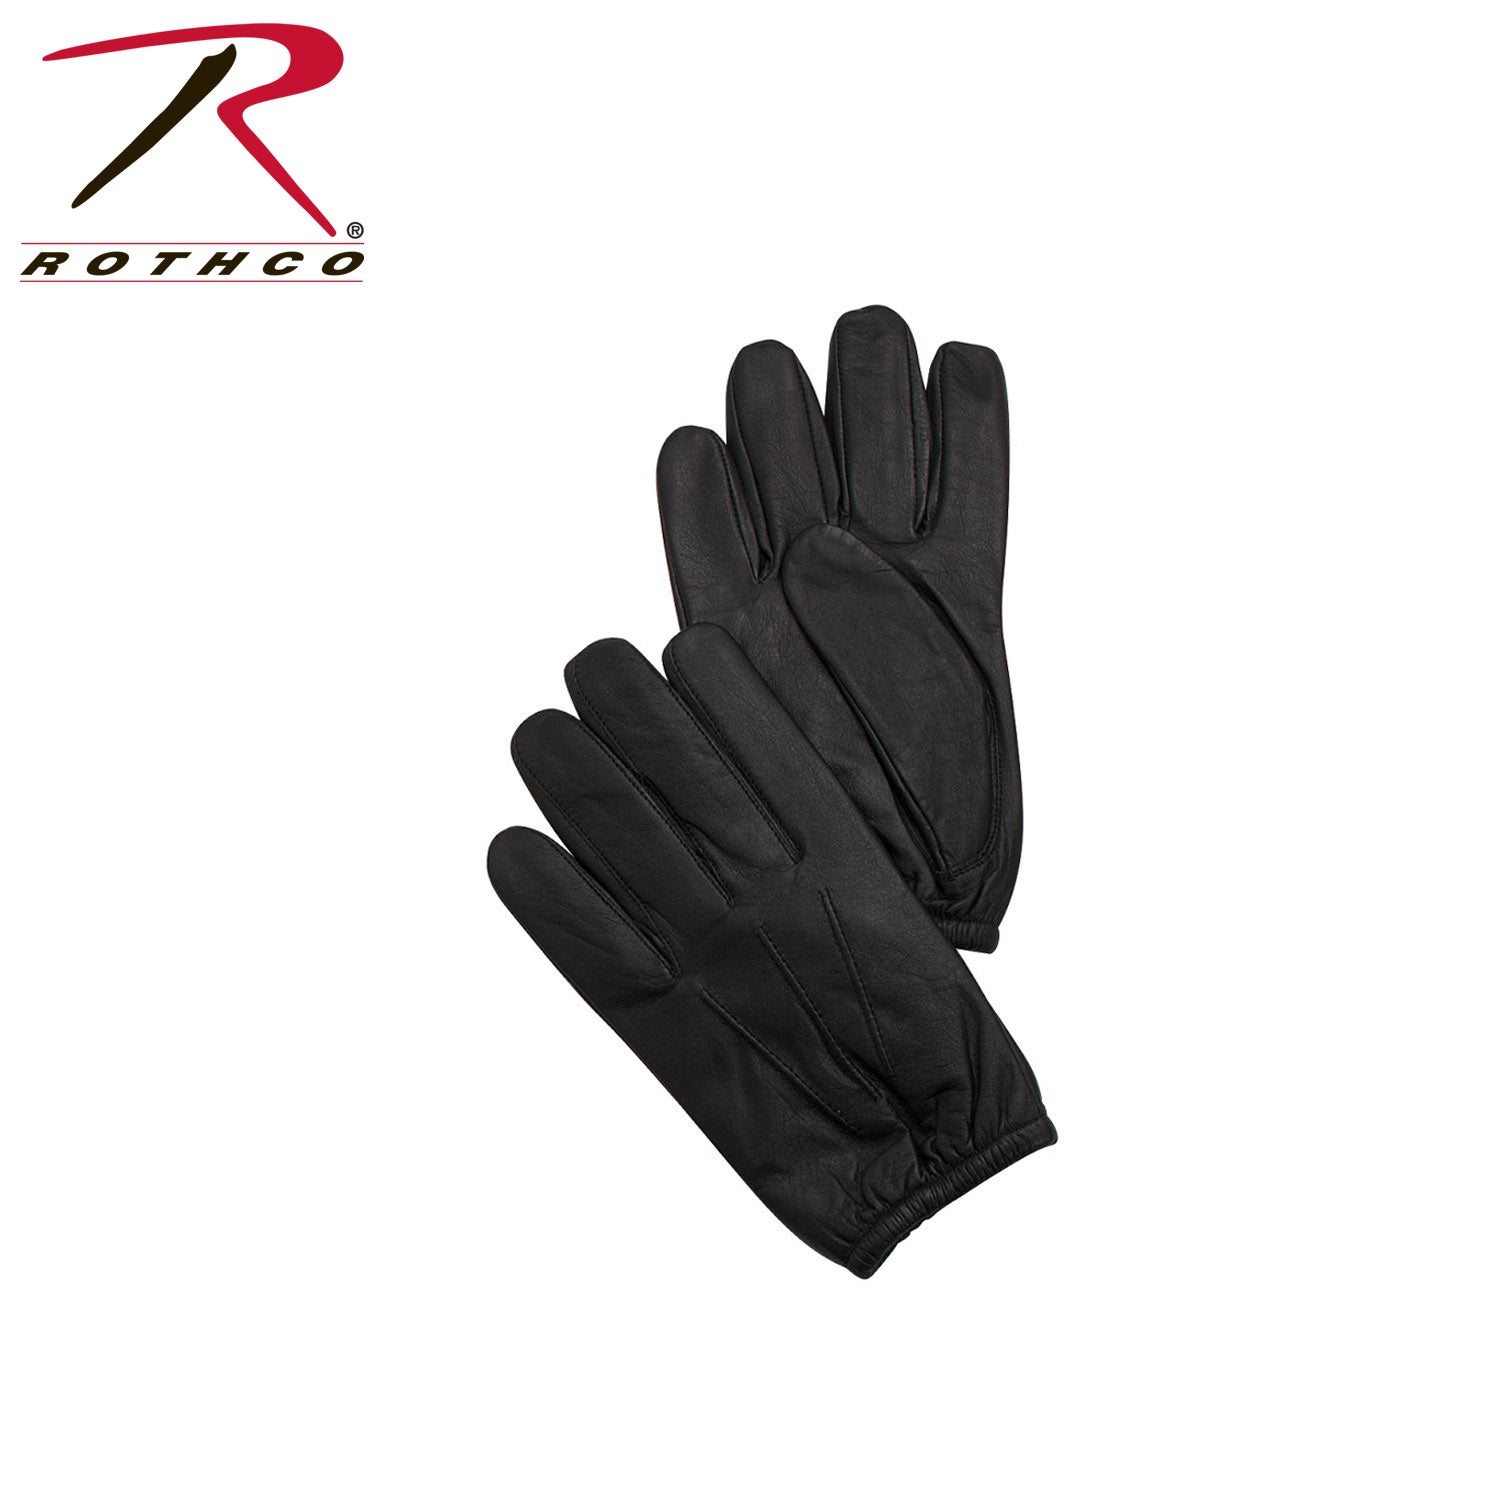 Rothco Police Cut Resistant Lined Gloves - Tactical Choice Plus